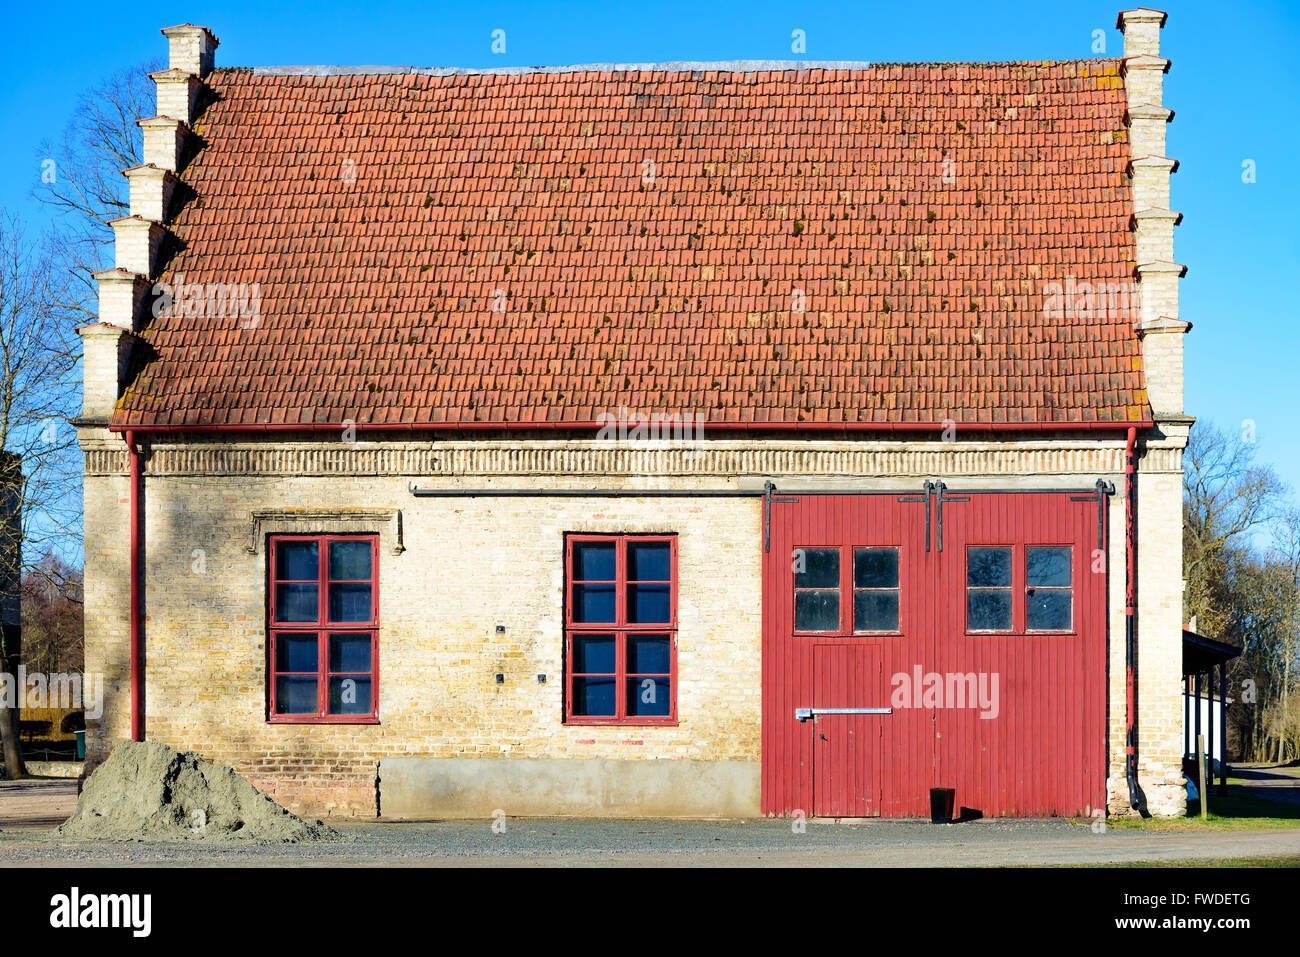 Vittskovle, Sweden - April 1, 2016: An old storage building with interesting architectural details. Large vehicle door and two w Stock Photo